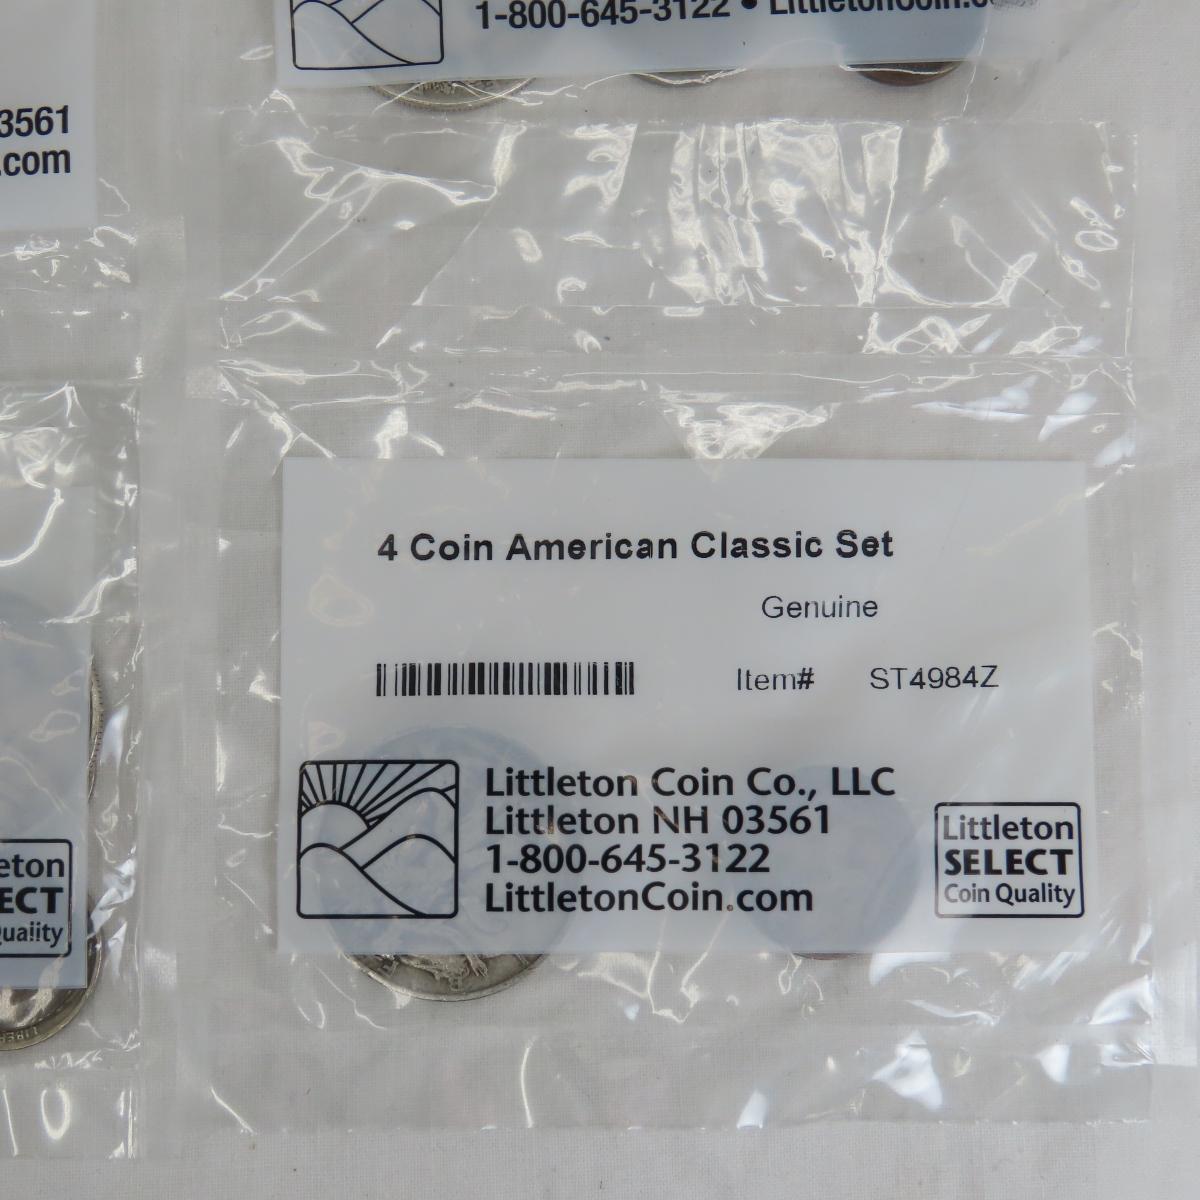 9 Littleton Coin 4 Coin American Classic Sets